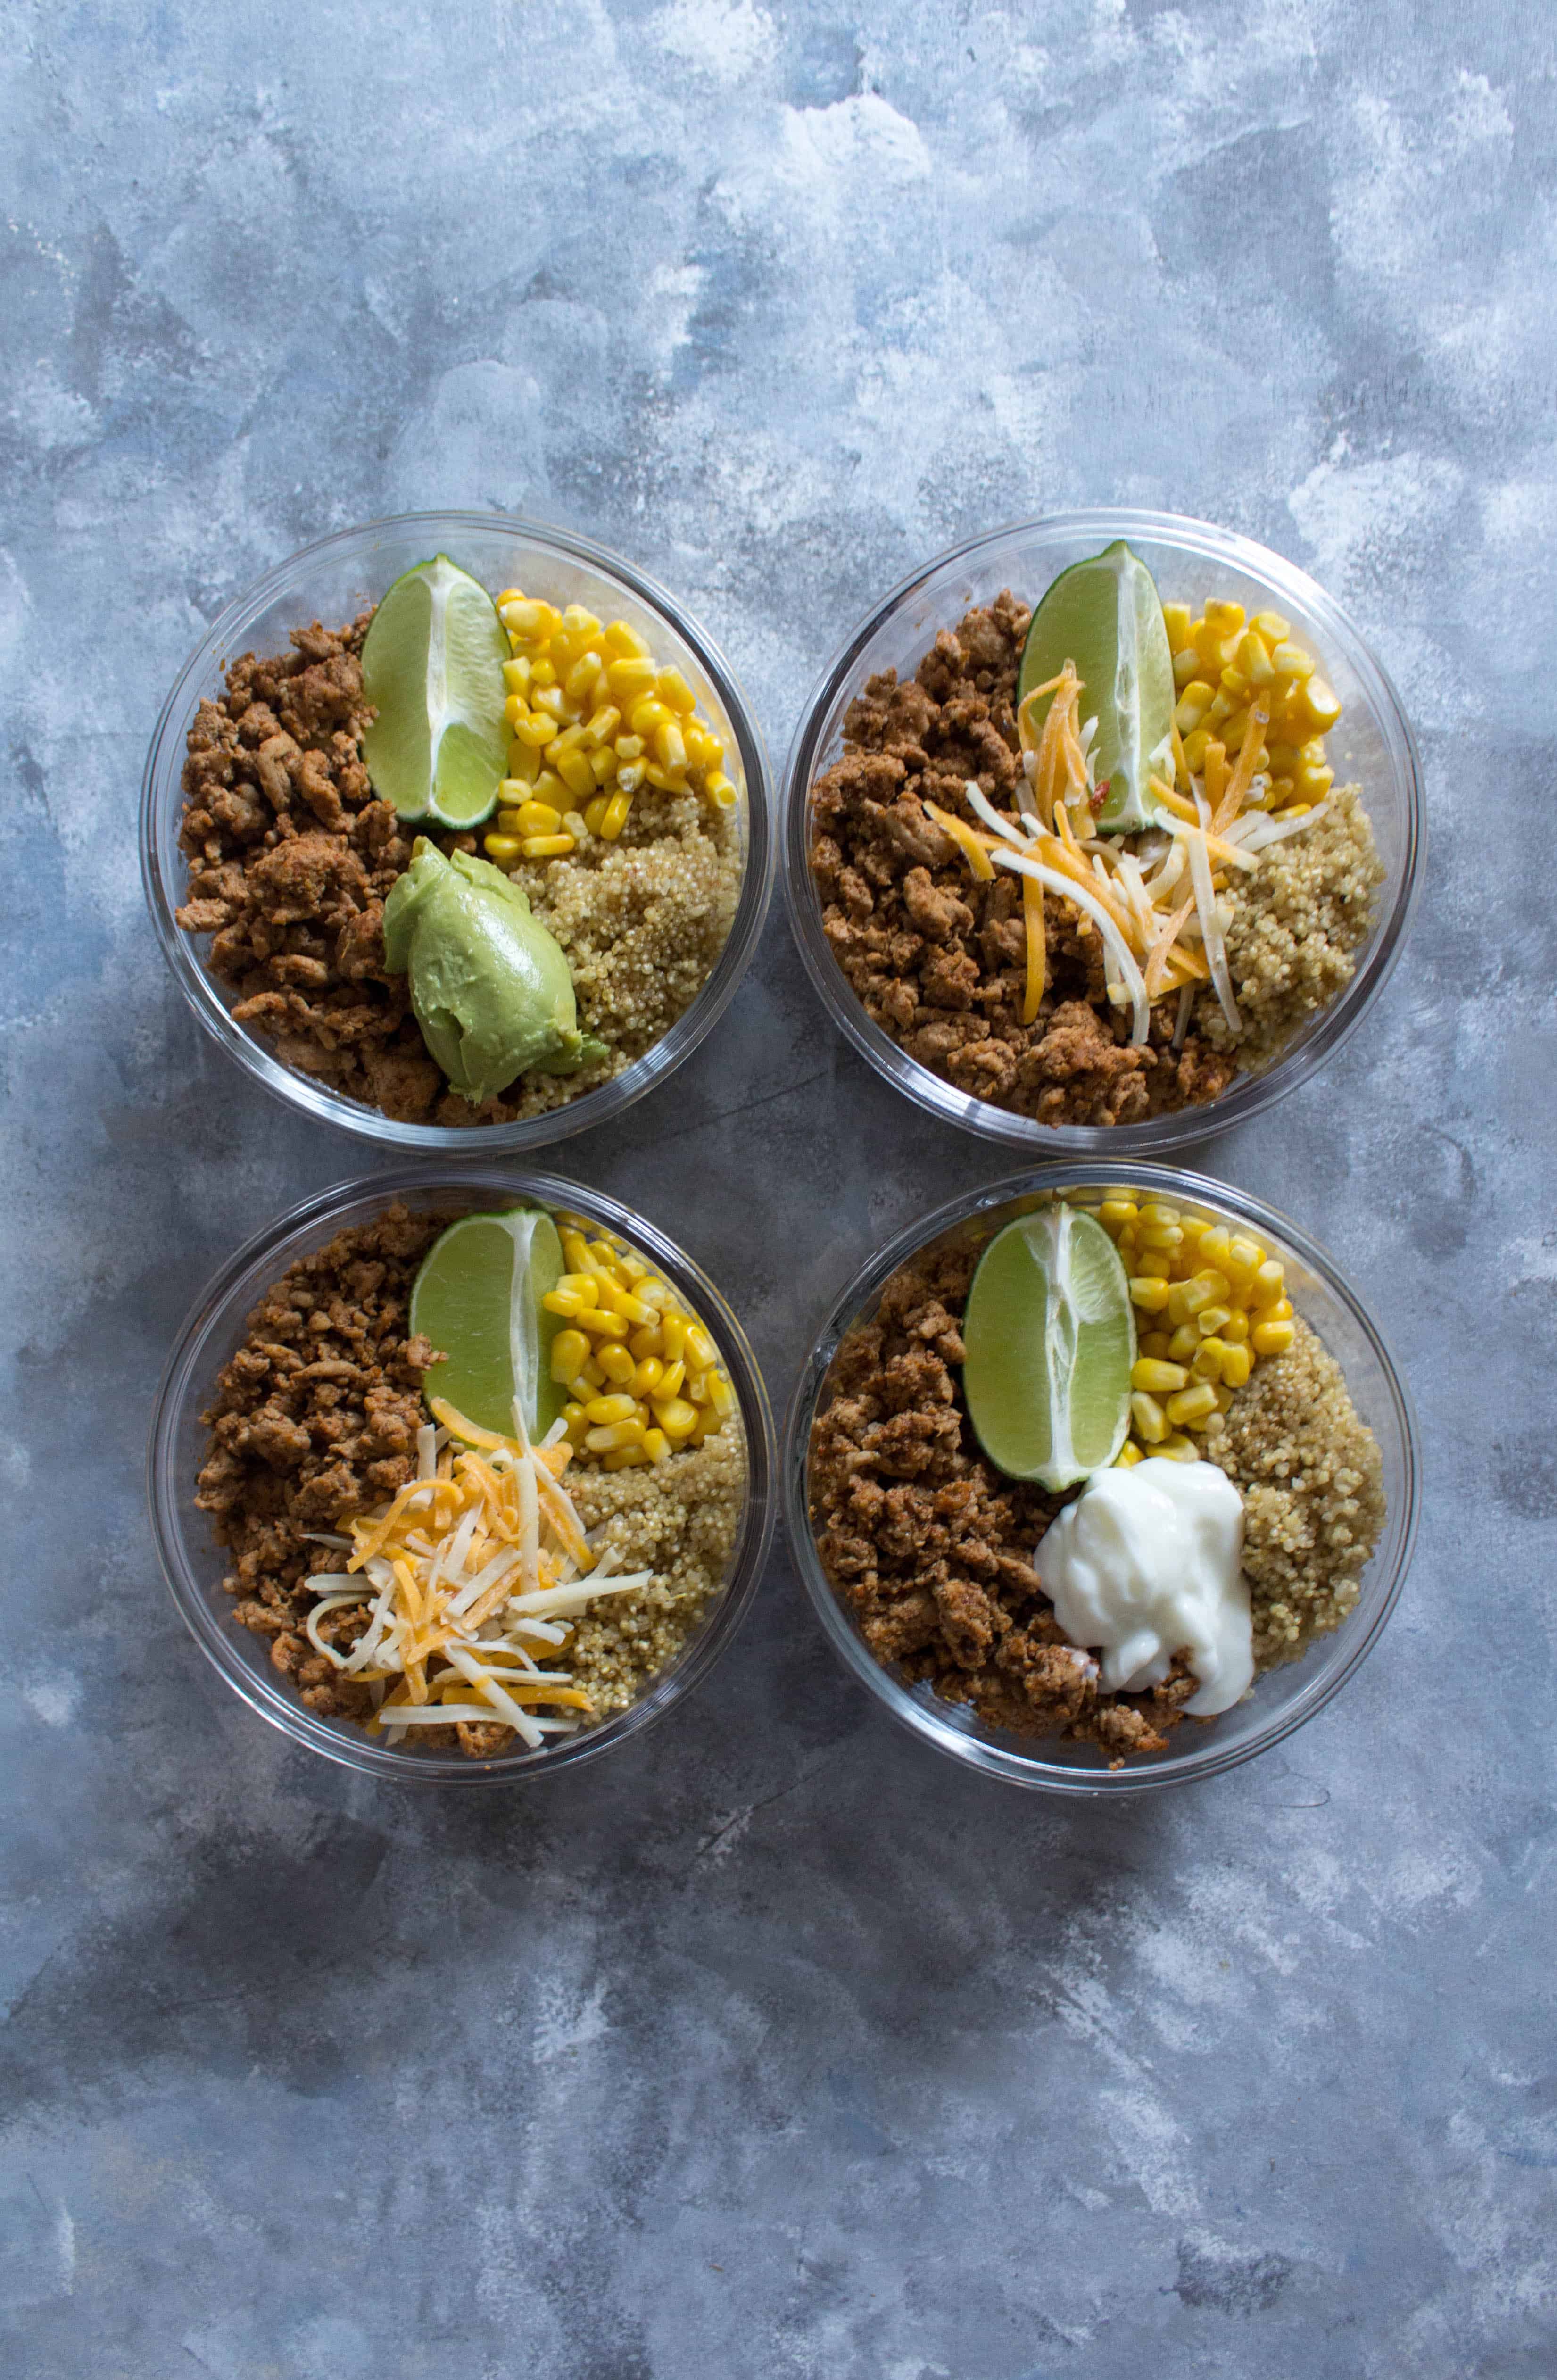 A healthier version of the popular taco bowls for lunch, this healthy turkey taco meal prep bowl will have you reaching for seconds! Made in under 30 minutes, it's simple but delicious!